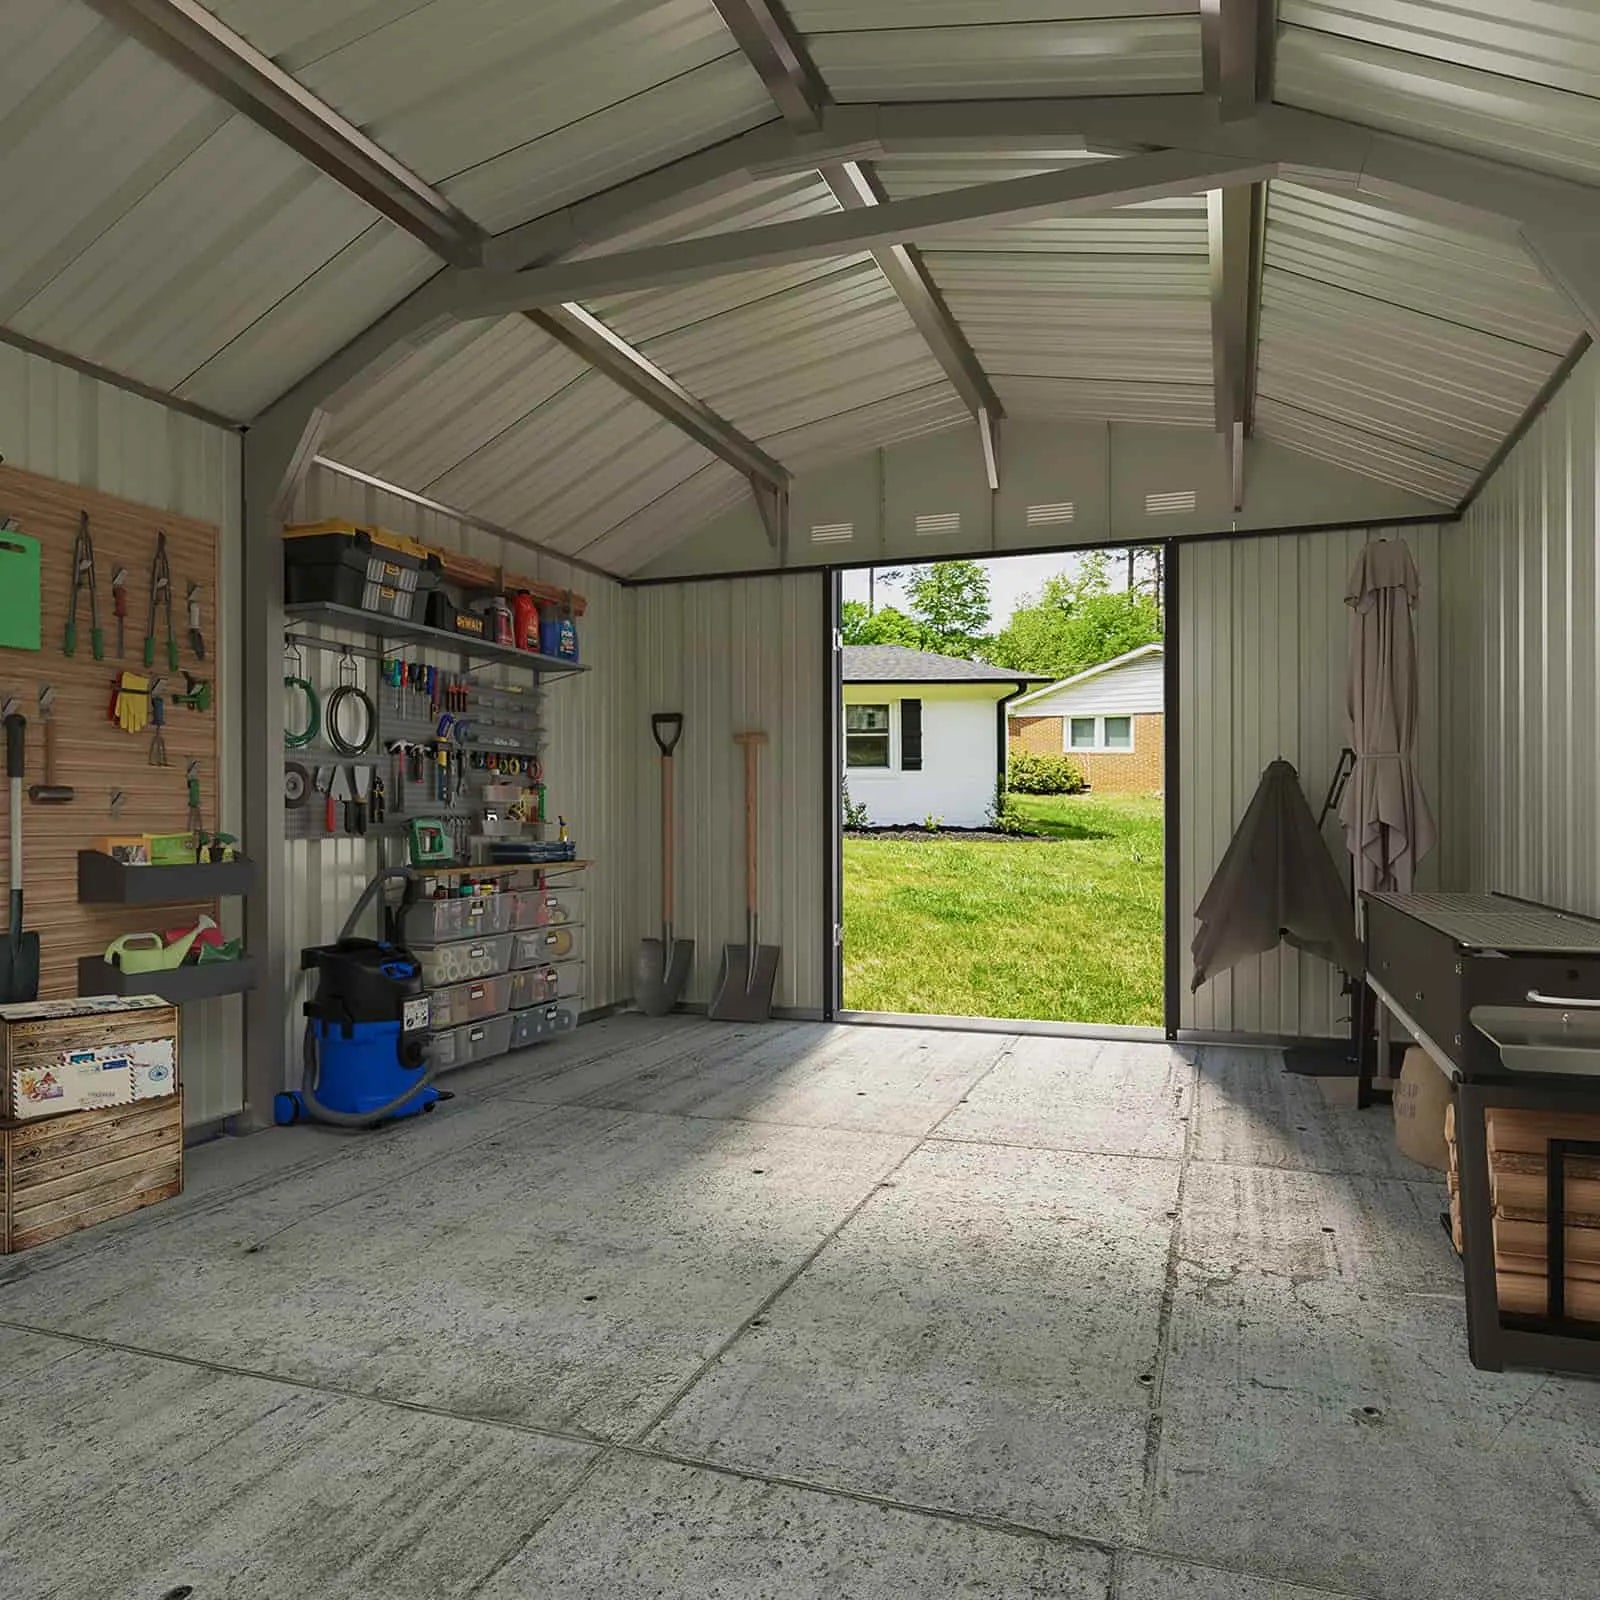 Patiowell 10x12 Metal Shed-Large Storage Space